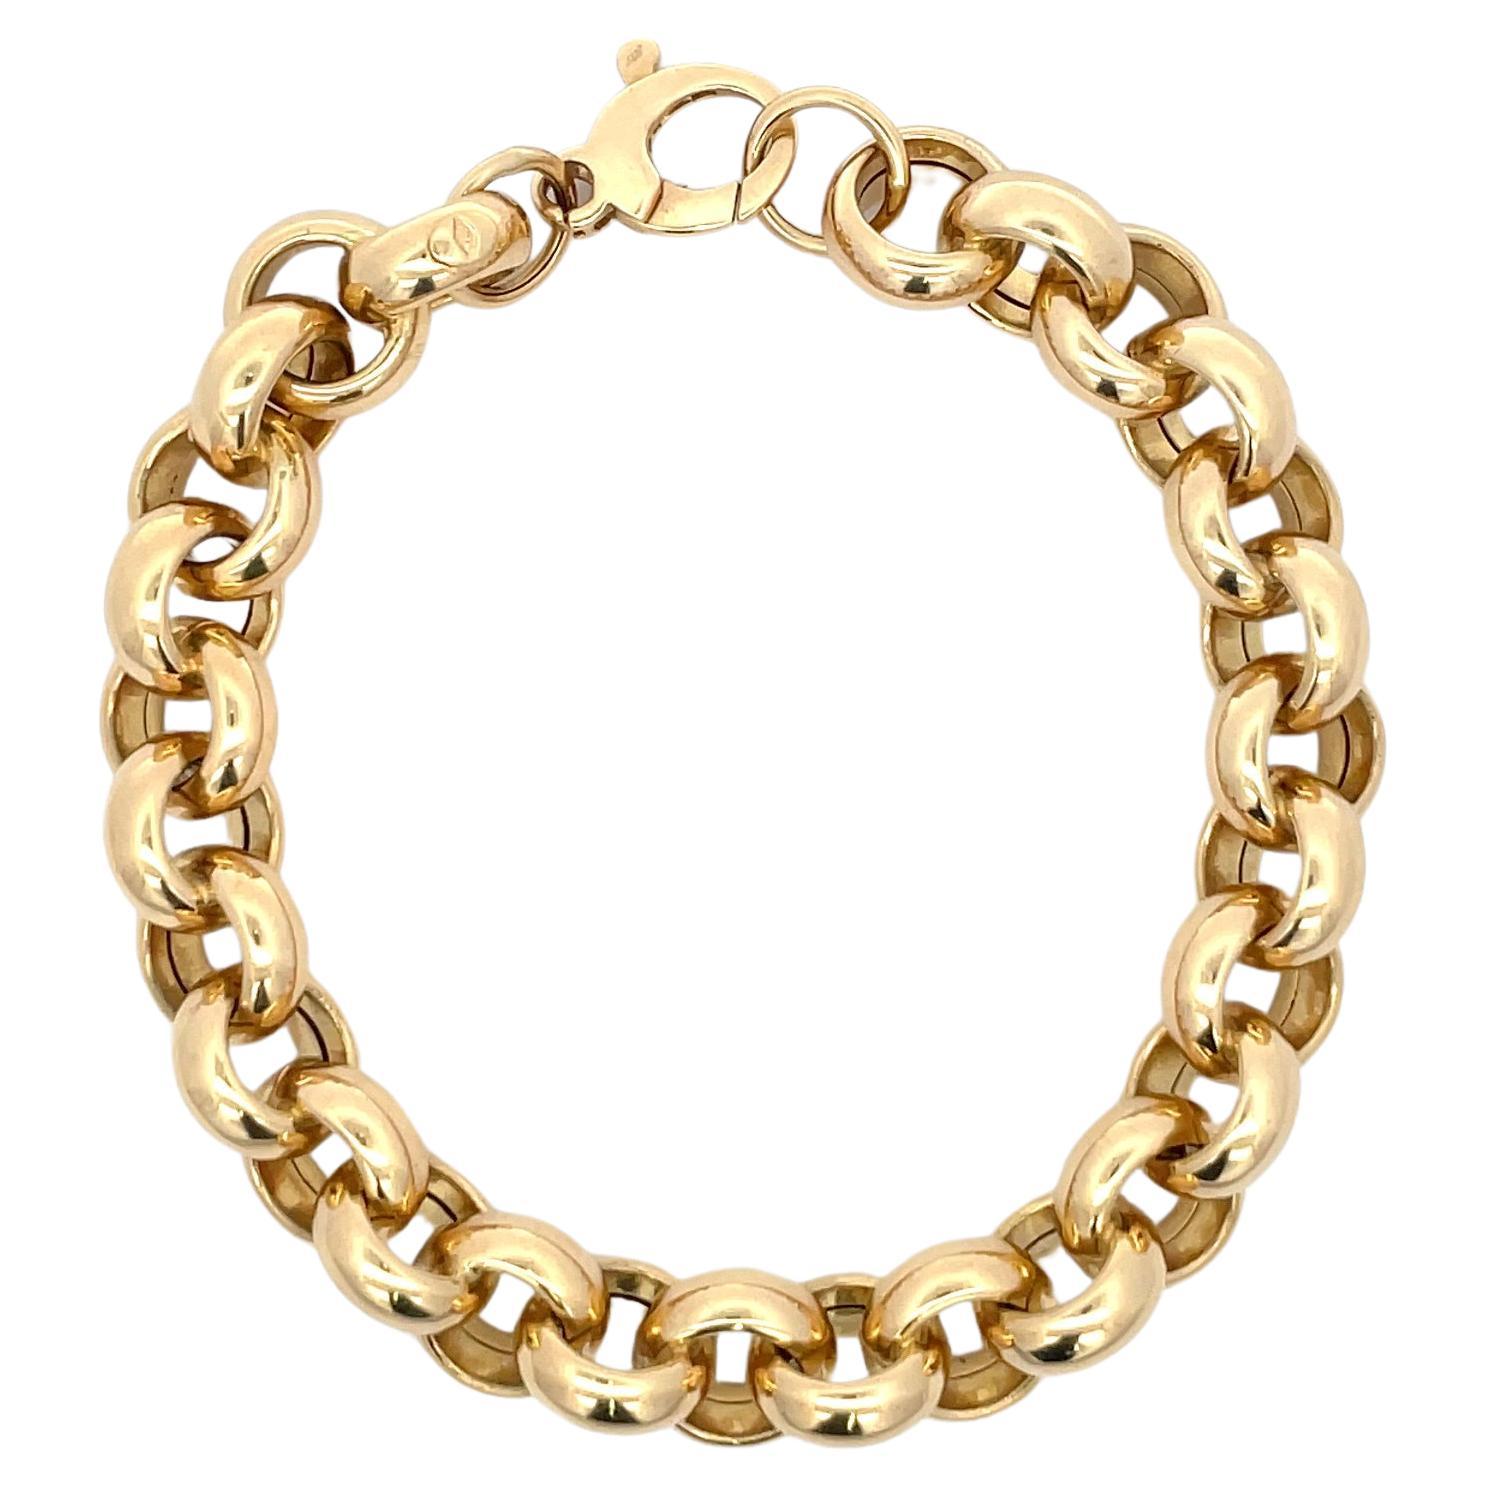 18 Karat Yellow Gold Rolo Link Bracelet 20.6 Grams Made in Italy